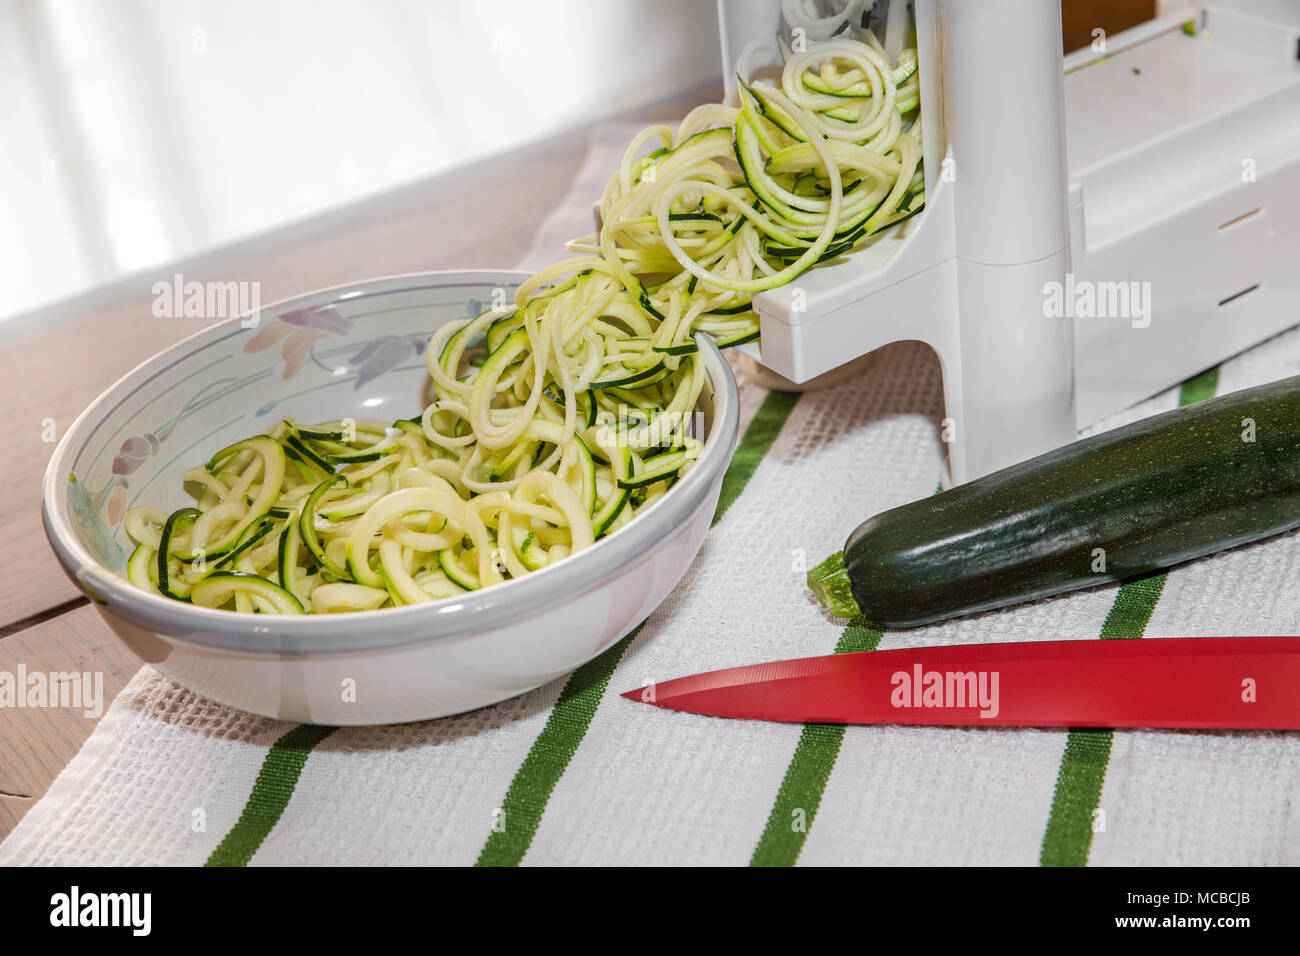 Spiral zucchini noodles called zoodles prepared in spiralizer